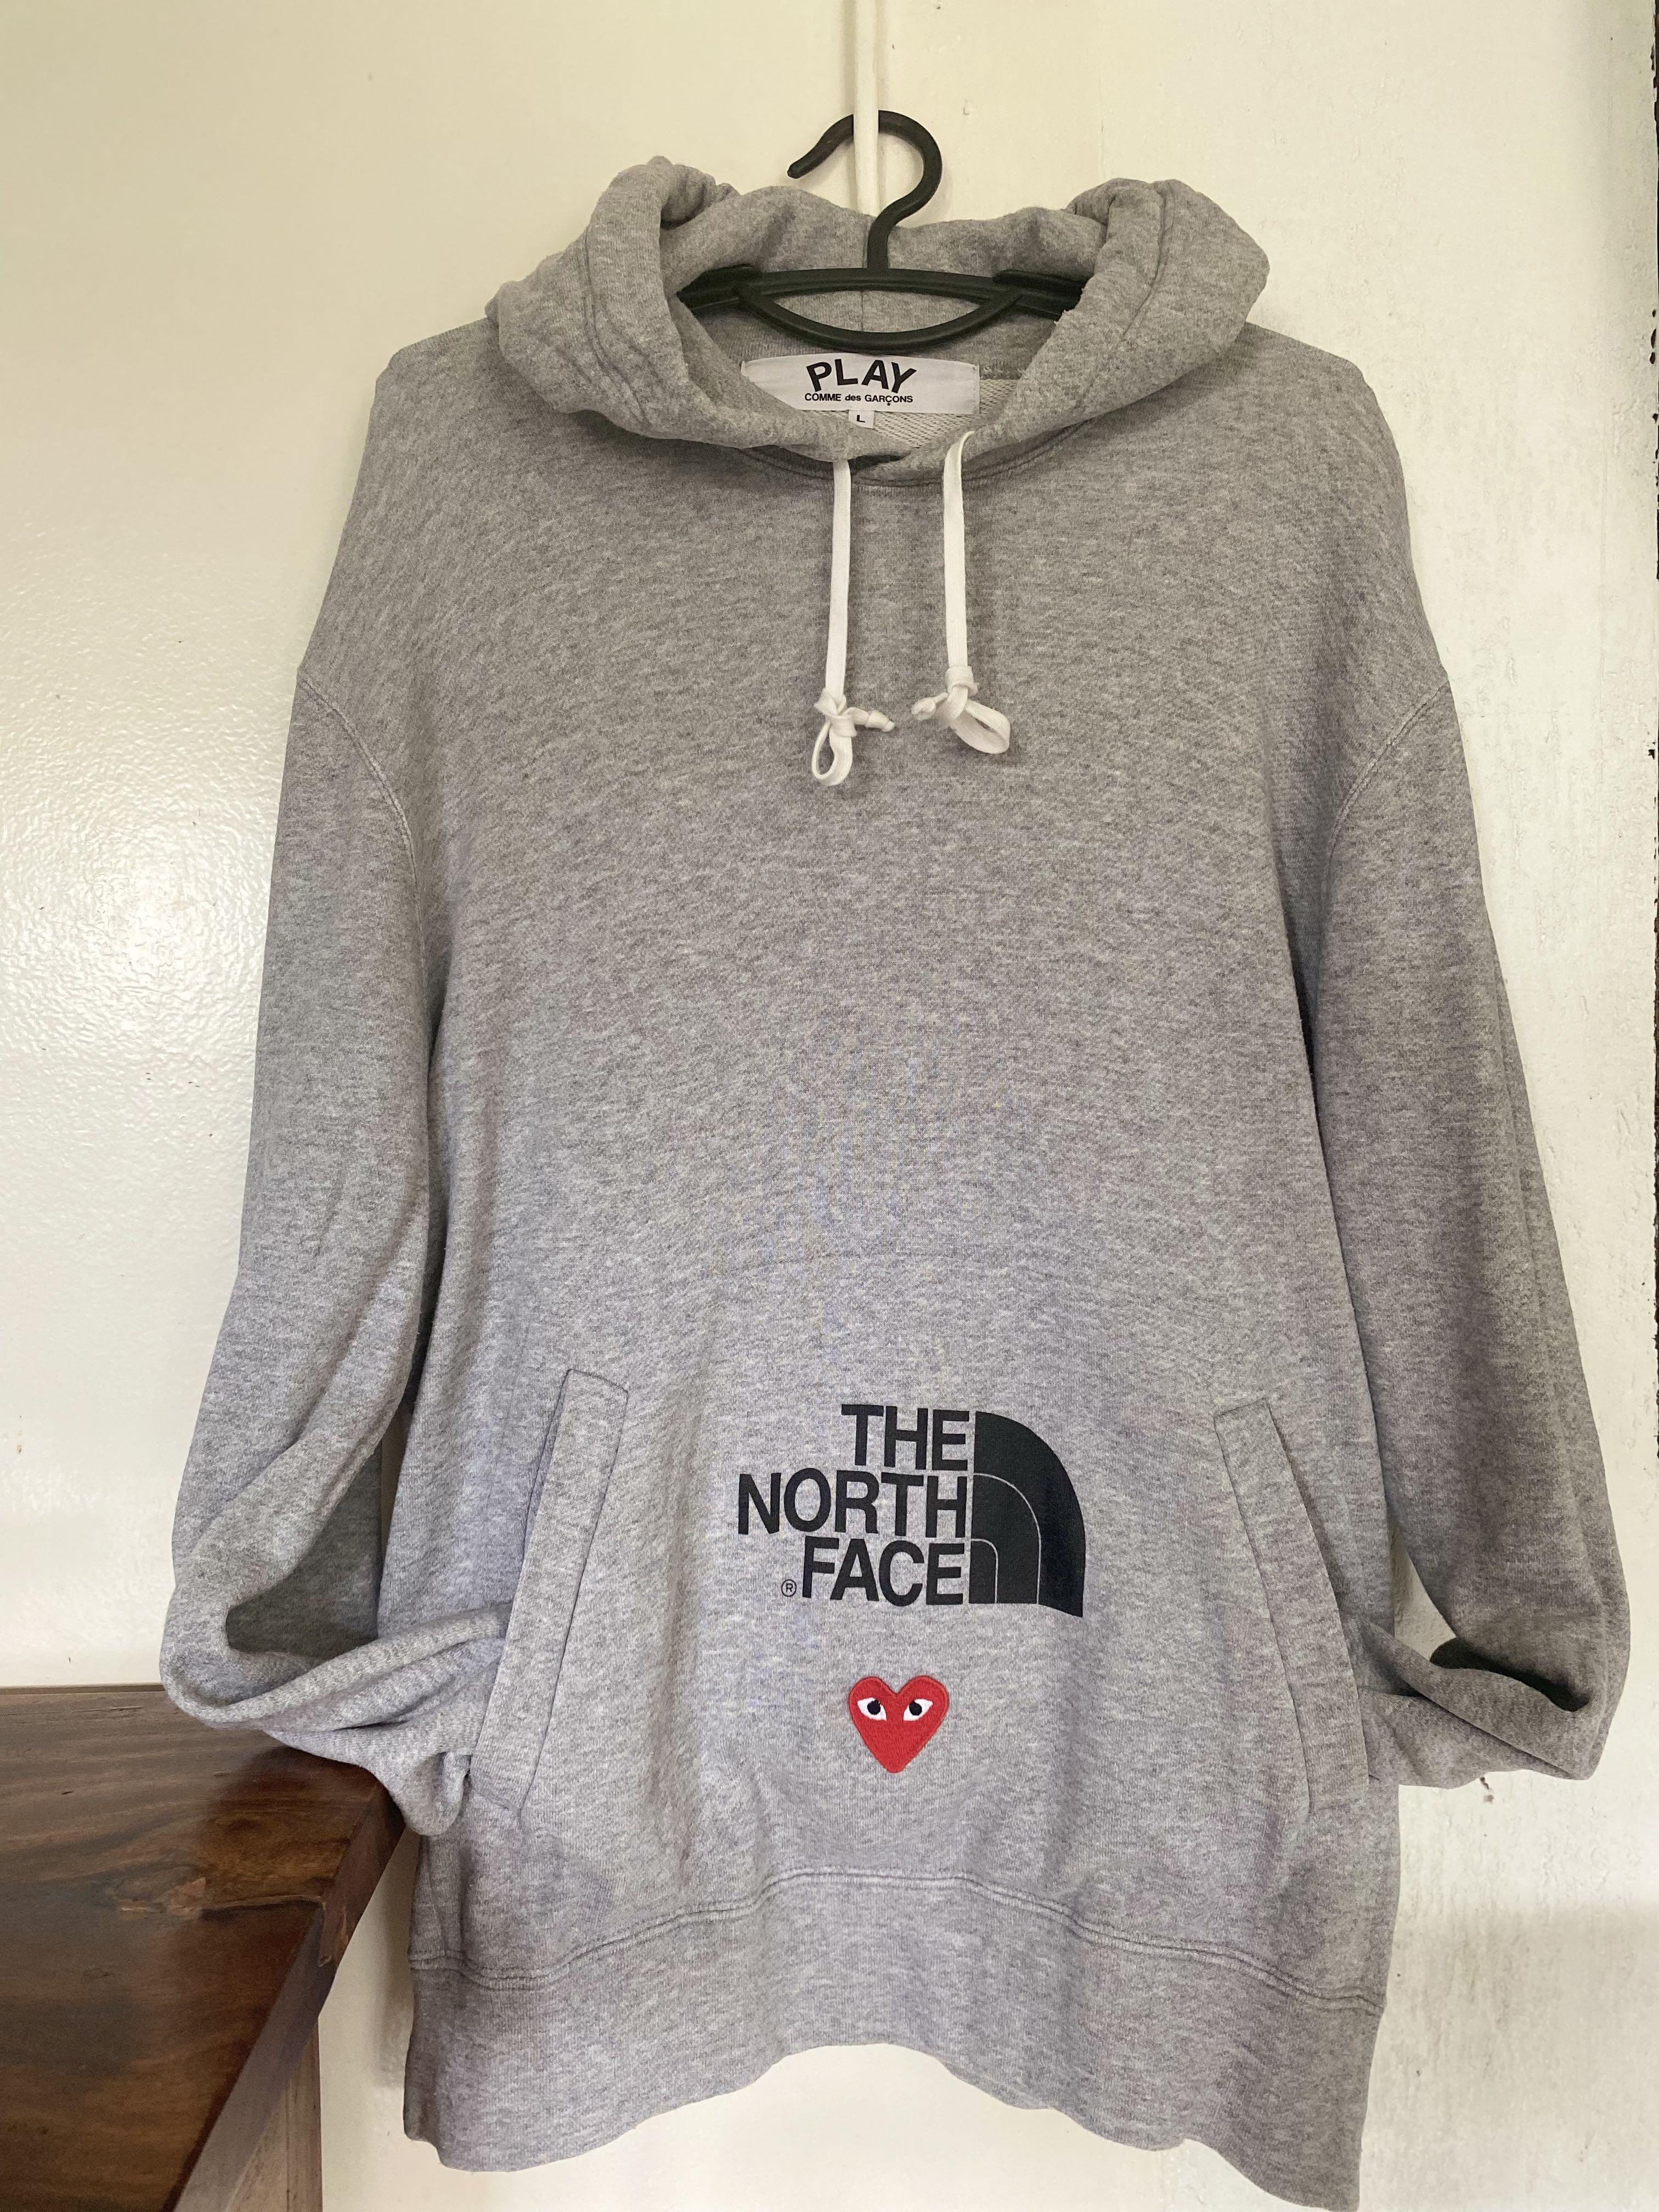 Play CDG x The north face (TNF) hoodie jacket gray, Men's Fashion